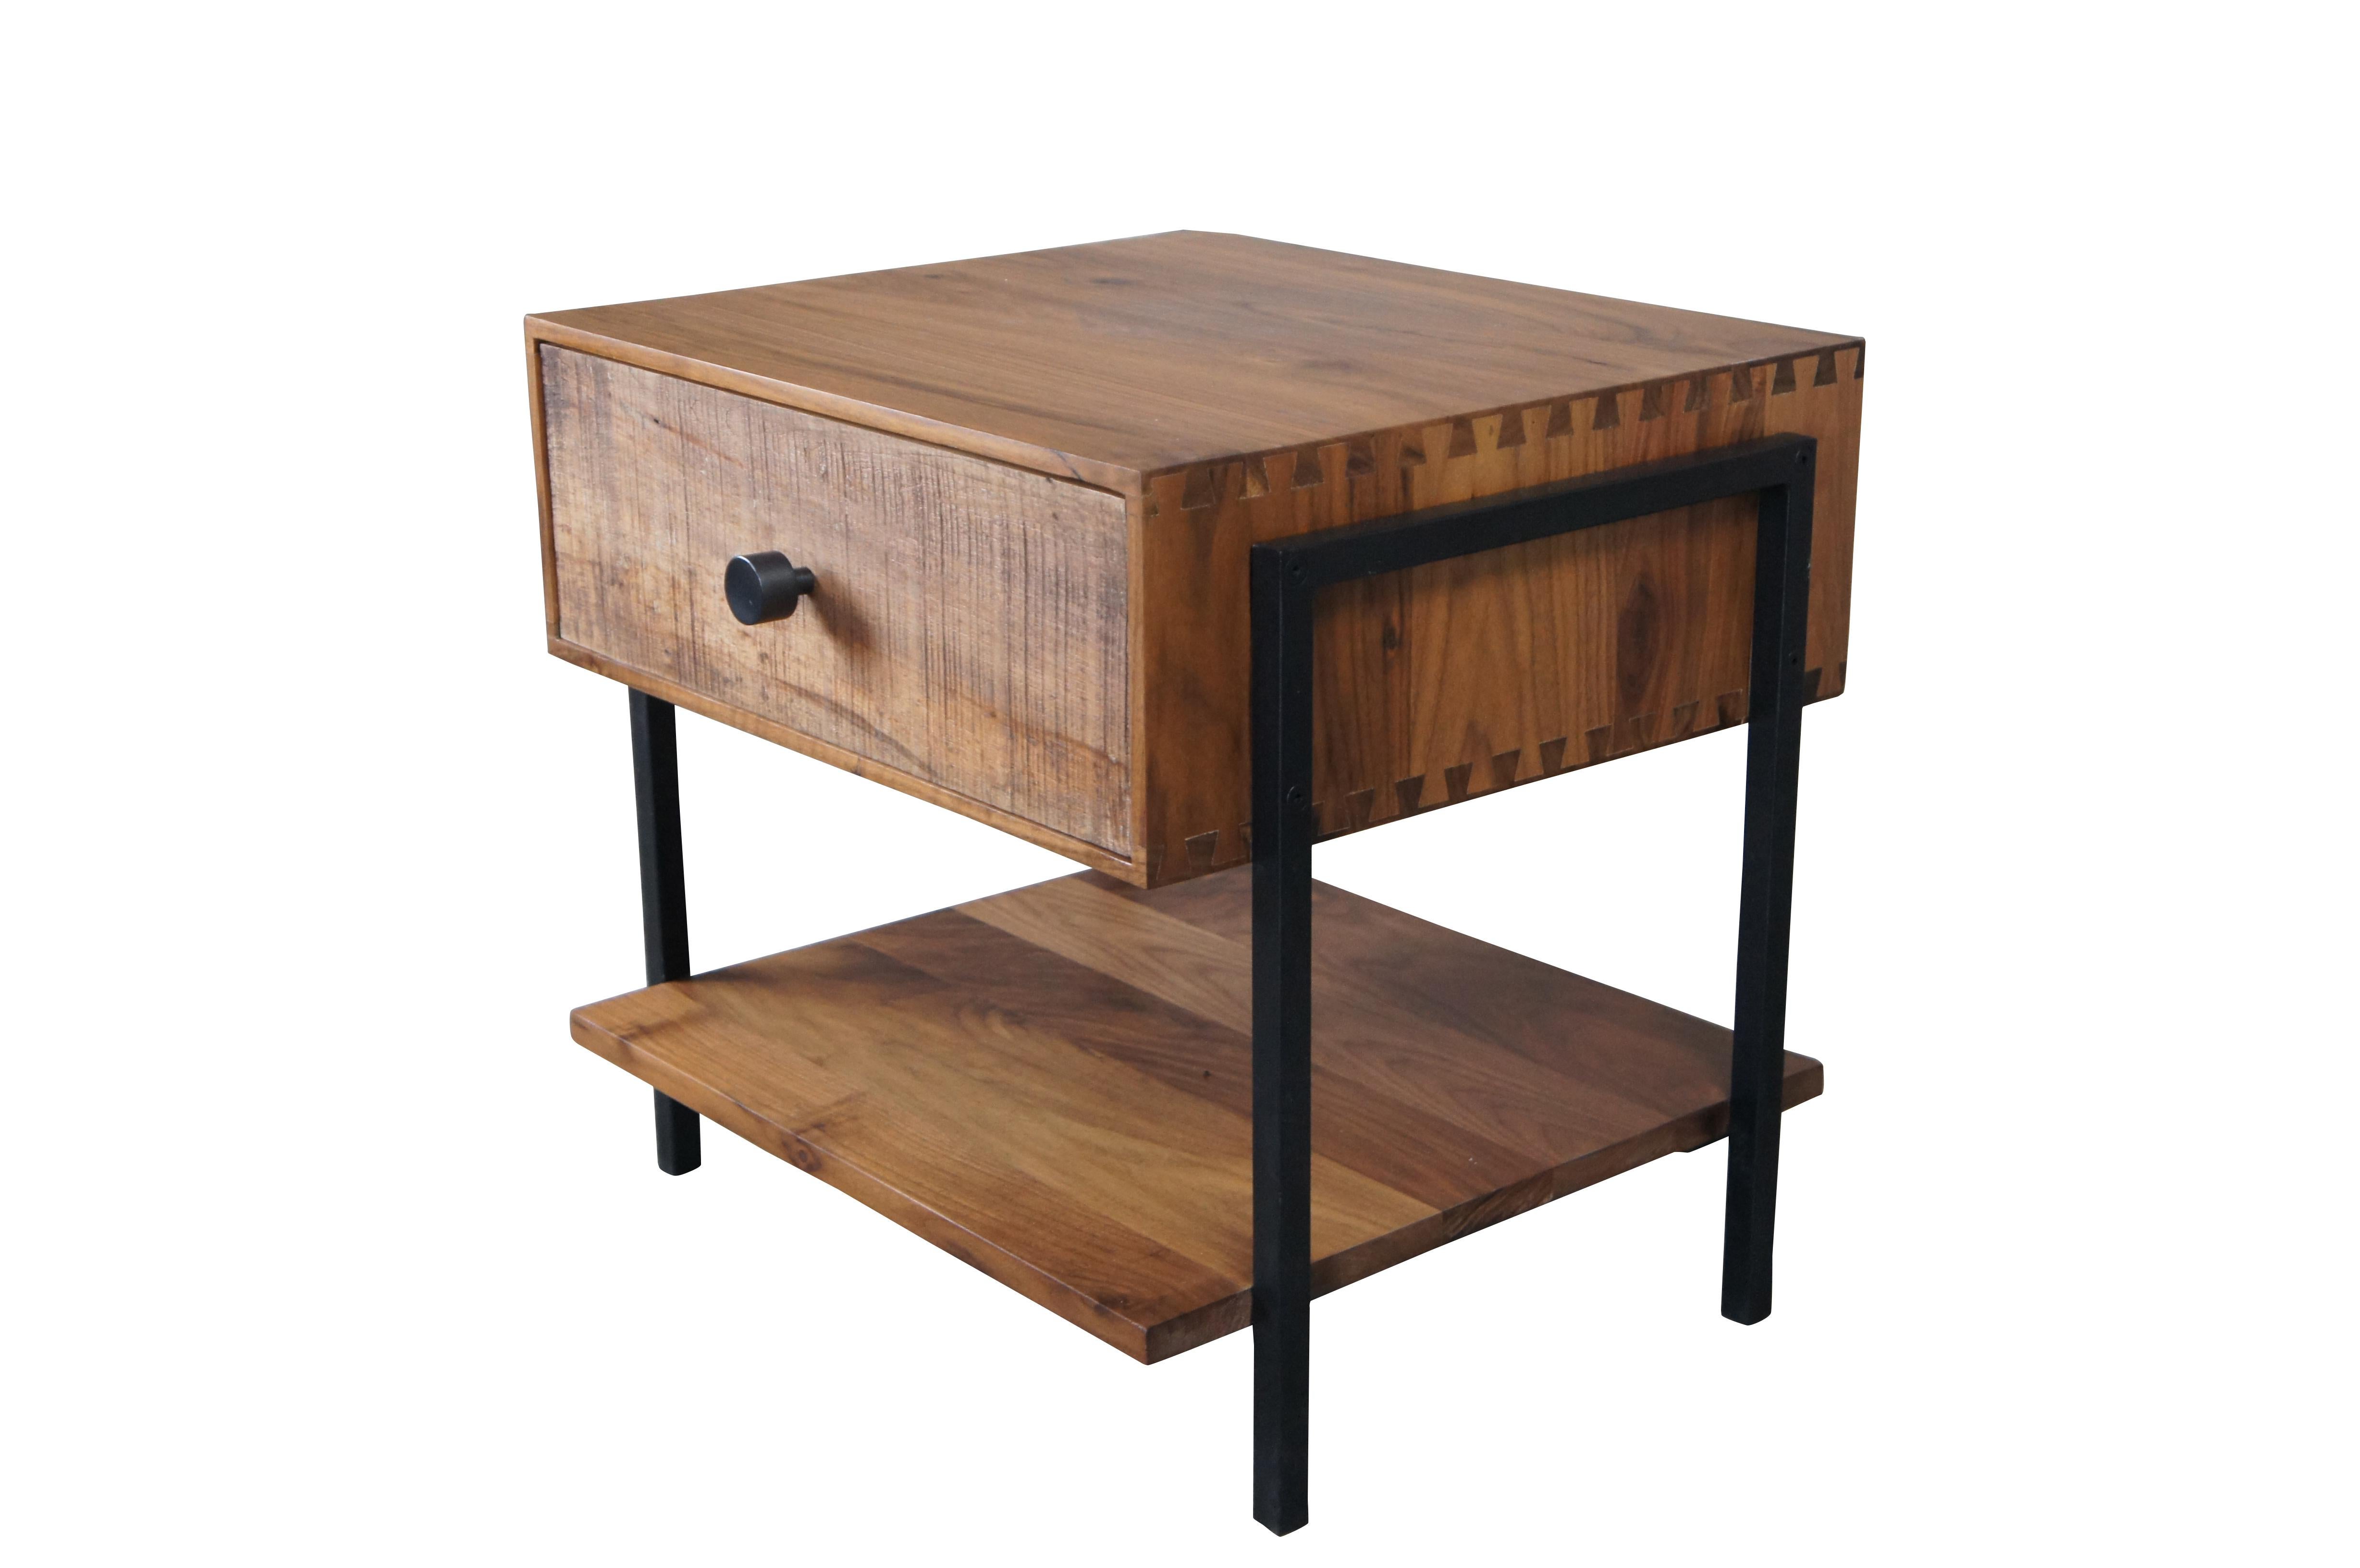 Atwood nightstand's eclectic nature mixes rustic reclaimed peroba wood from Brazil with refined solid black walnut. This nightstand's uniquely weathered peroba wood drawer and a bottom shelf offer generous storage, supported by a walnut frame with